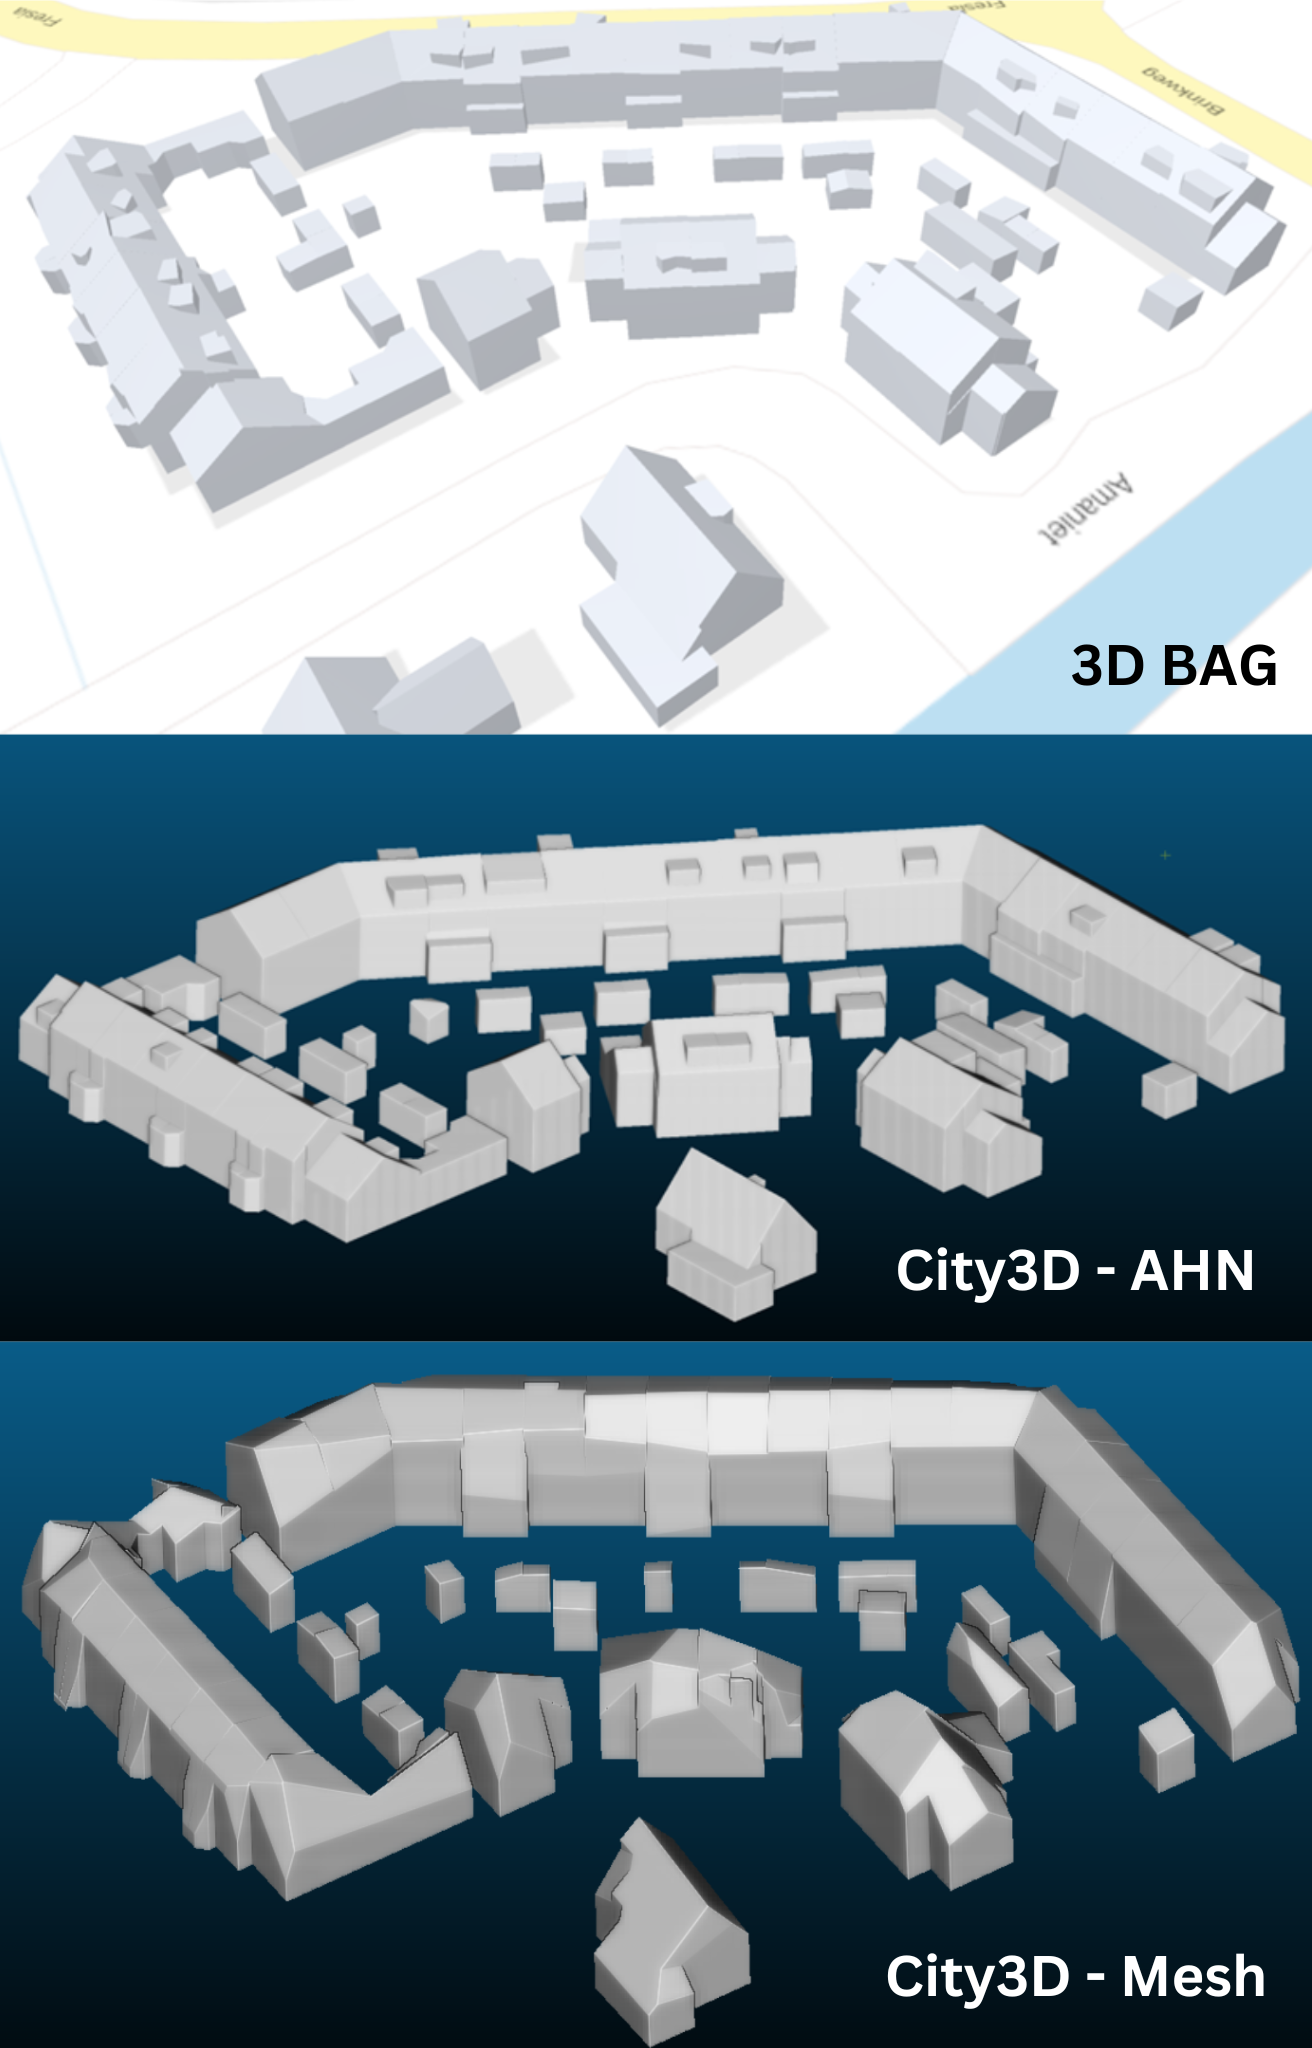 The possibilities and limitations of City3D as large-scale 3D building reconstruction model